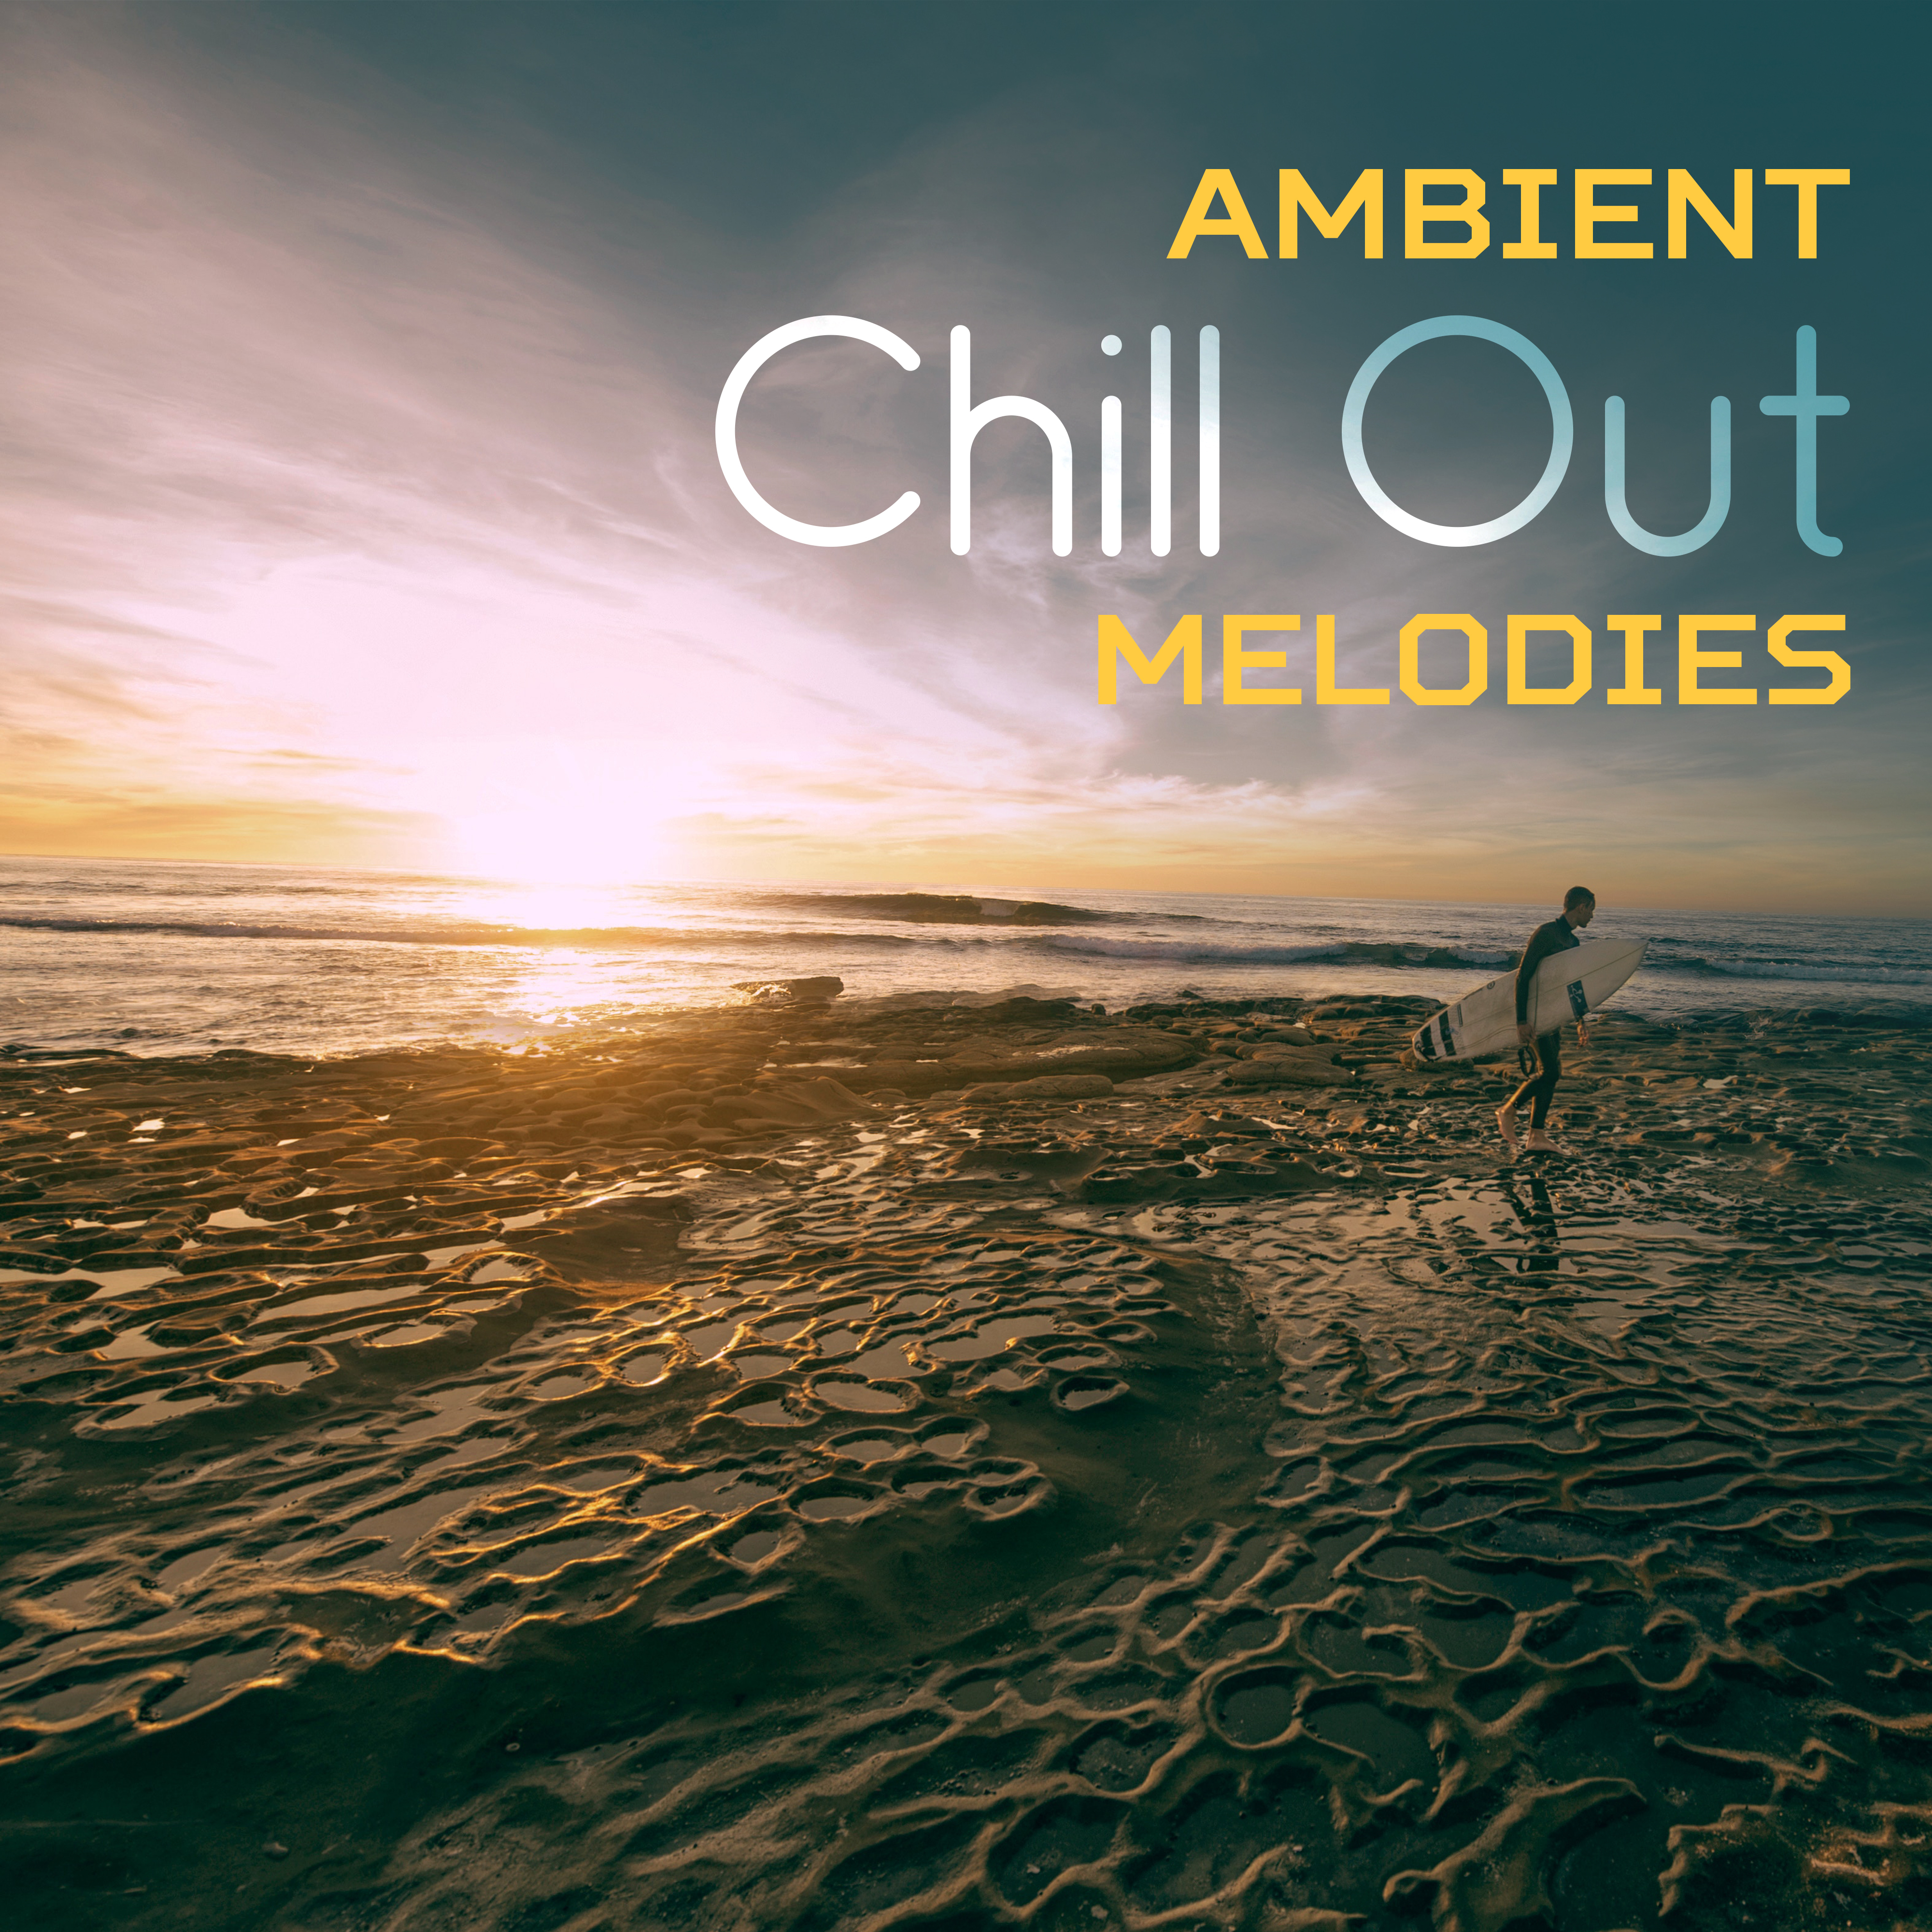 Ambient Chill Out Melodies – Calm Down with Chill Out Music, Beats for Relaxing Evening, Stress Relief